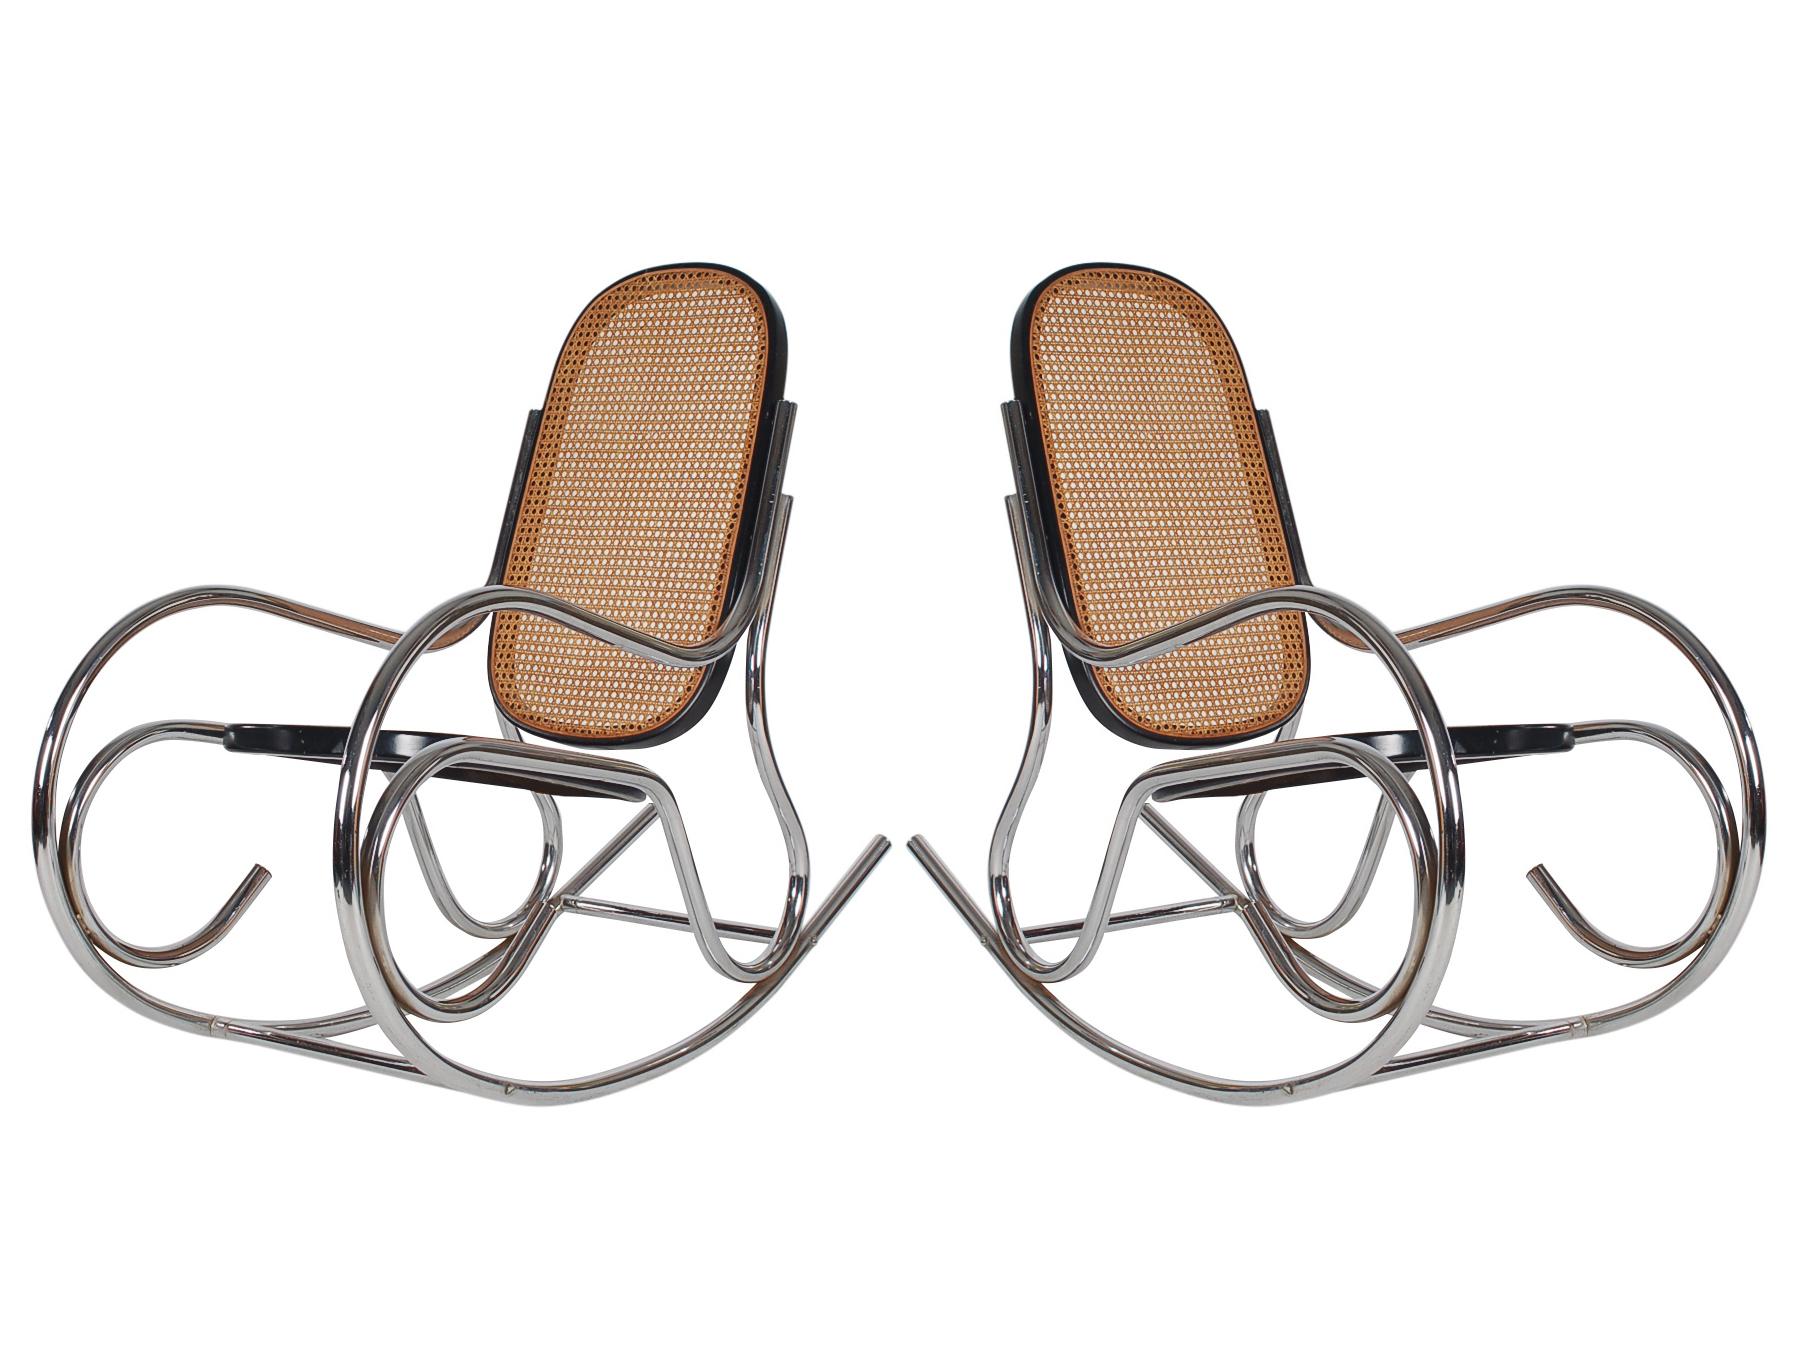 Italian Midcentury Scrolled Chrome and Cane Rocking Chair in the Manner of Marcel Breuer For Sale